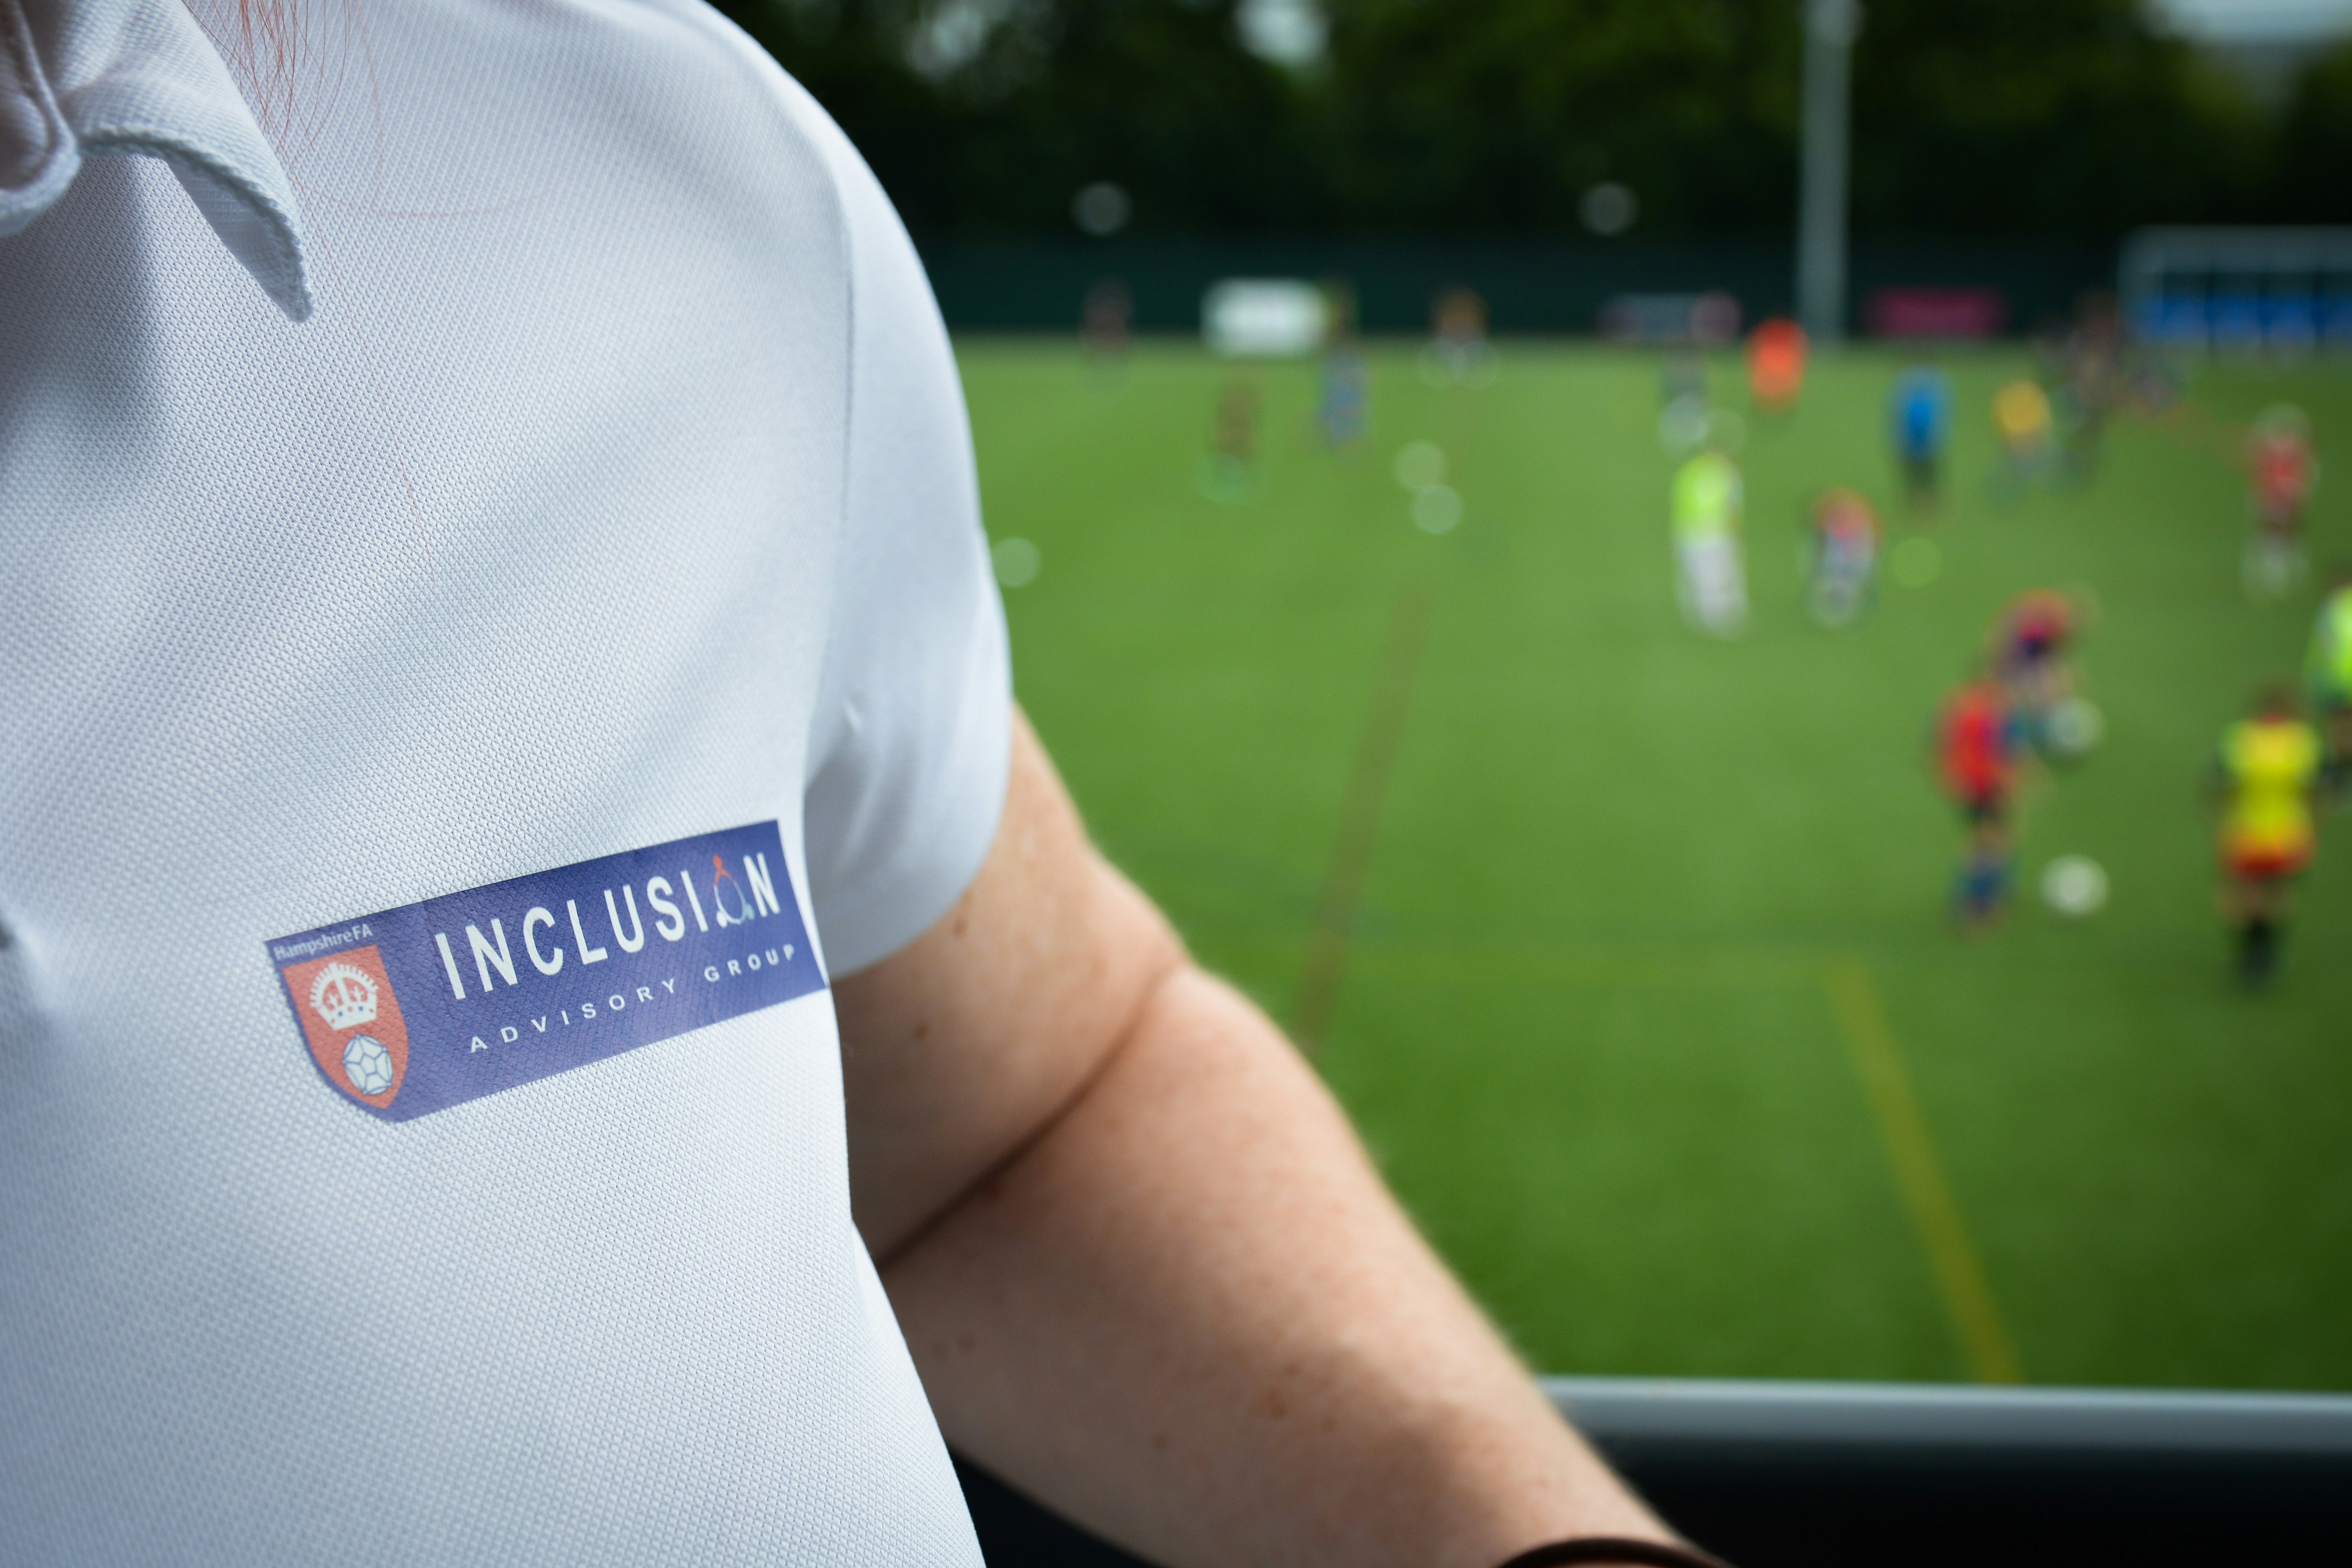 A close up of a white polo shirt with a logo which reads Inclusion Advisory Group. The logo is a blue recetange with white text. Blurred in the background shows people playing sport on a green pitch.